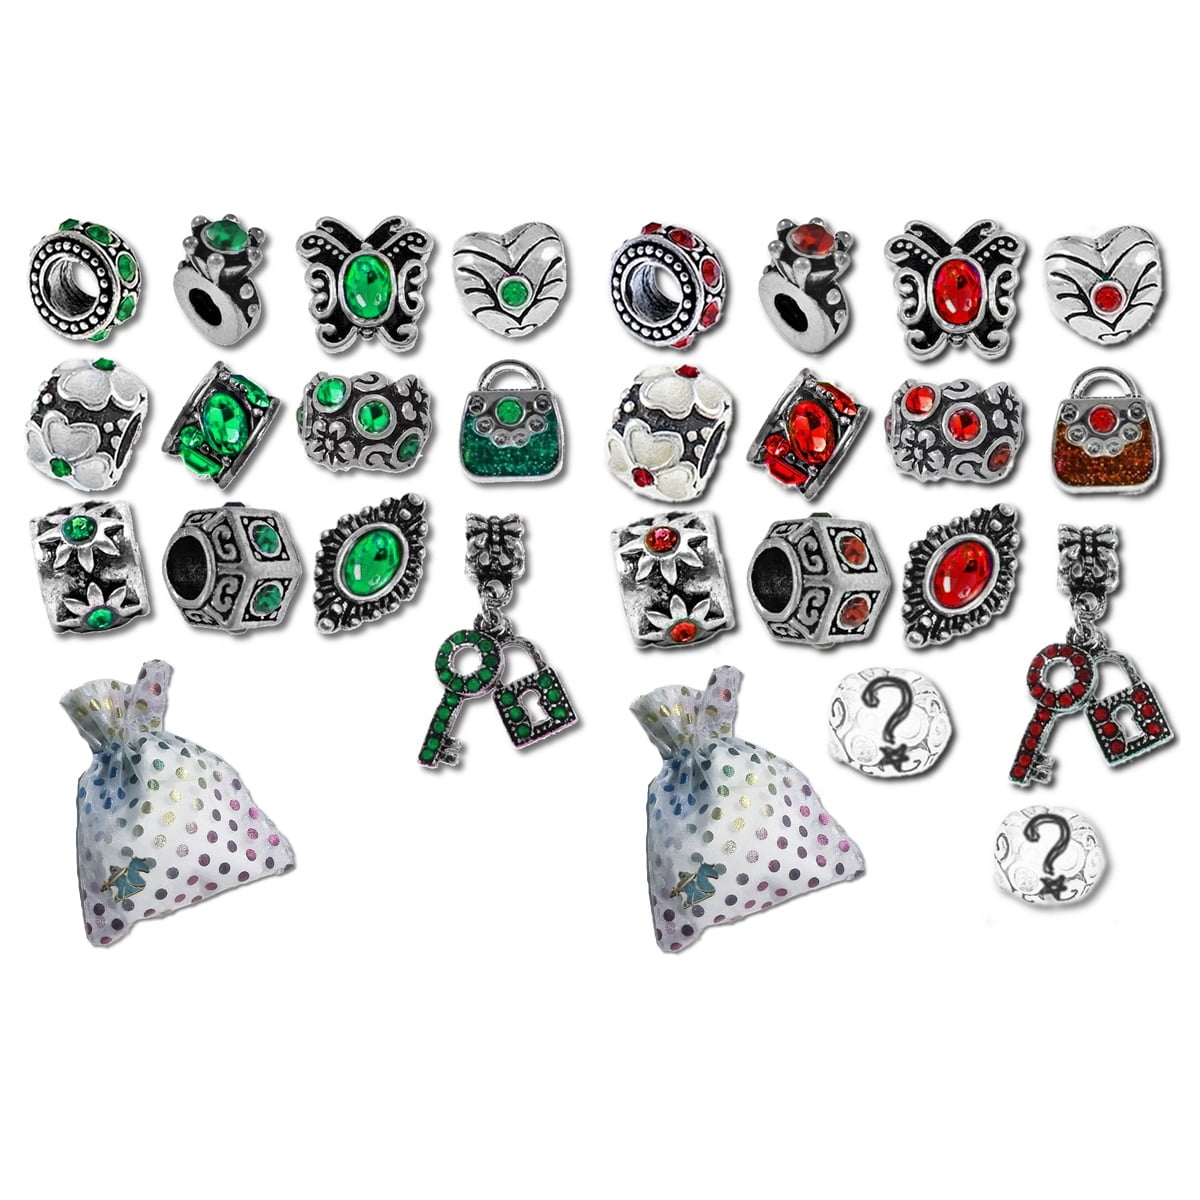 Valentine Beads and Charms for Pandora Charm Bracelets, Red and